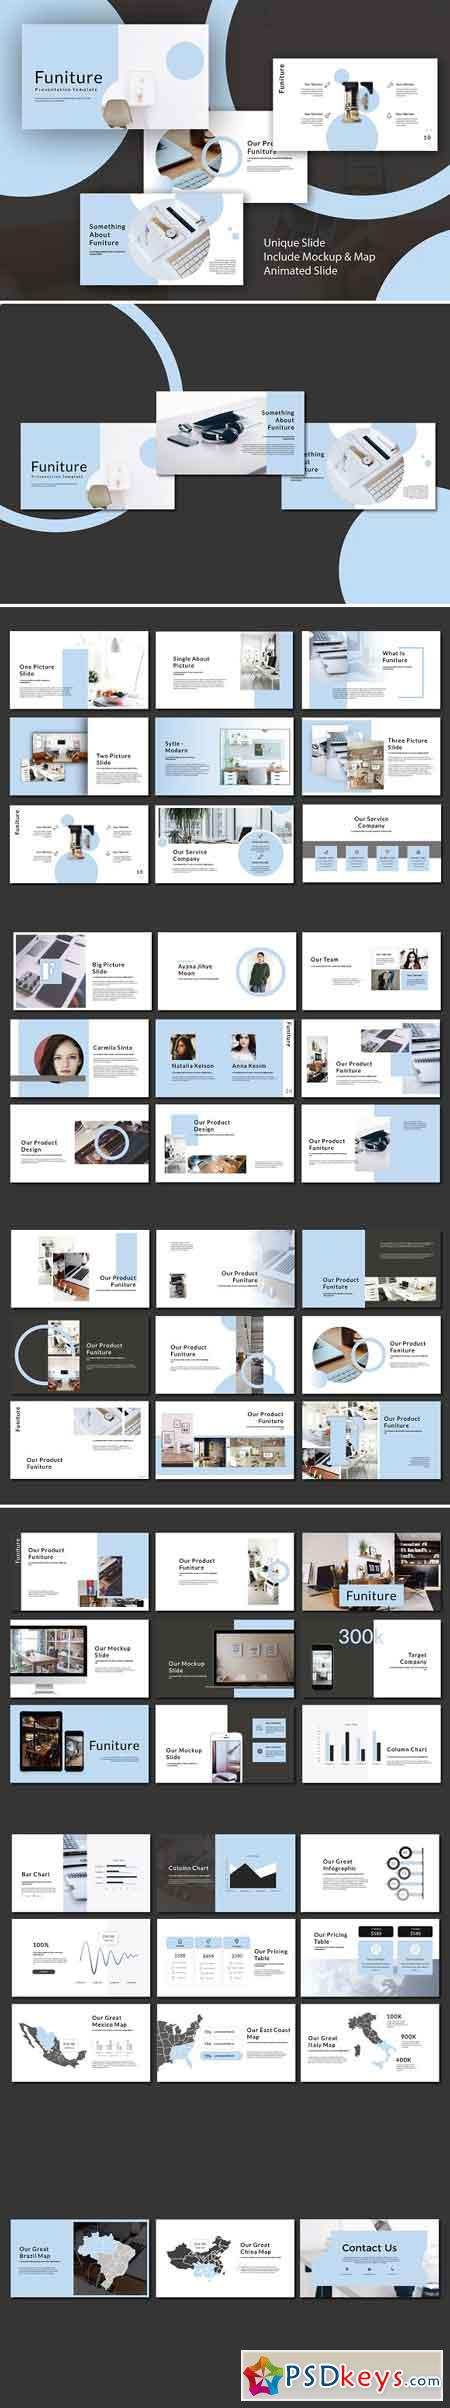 Funiture Powerpoint Template 2737145